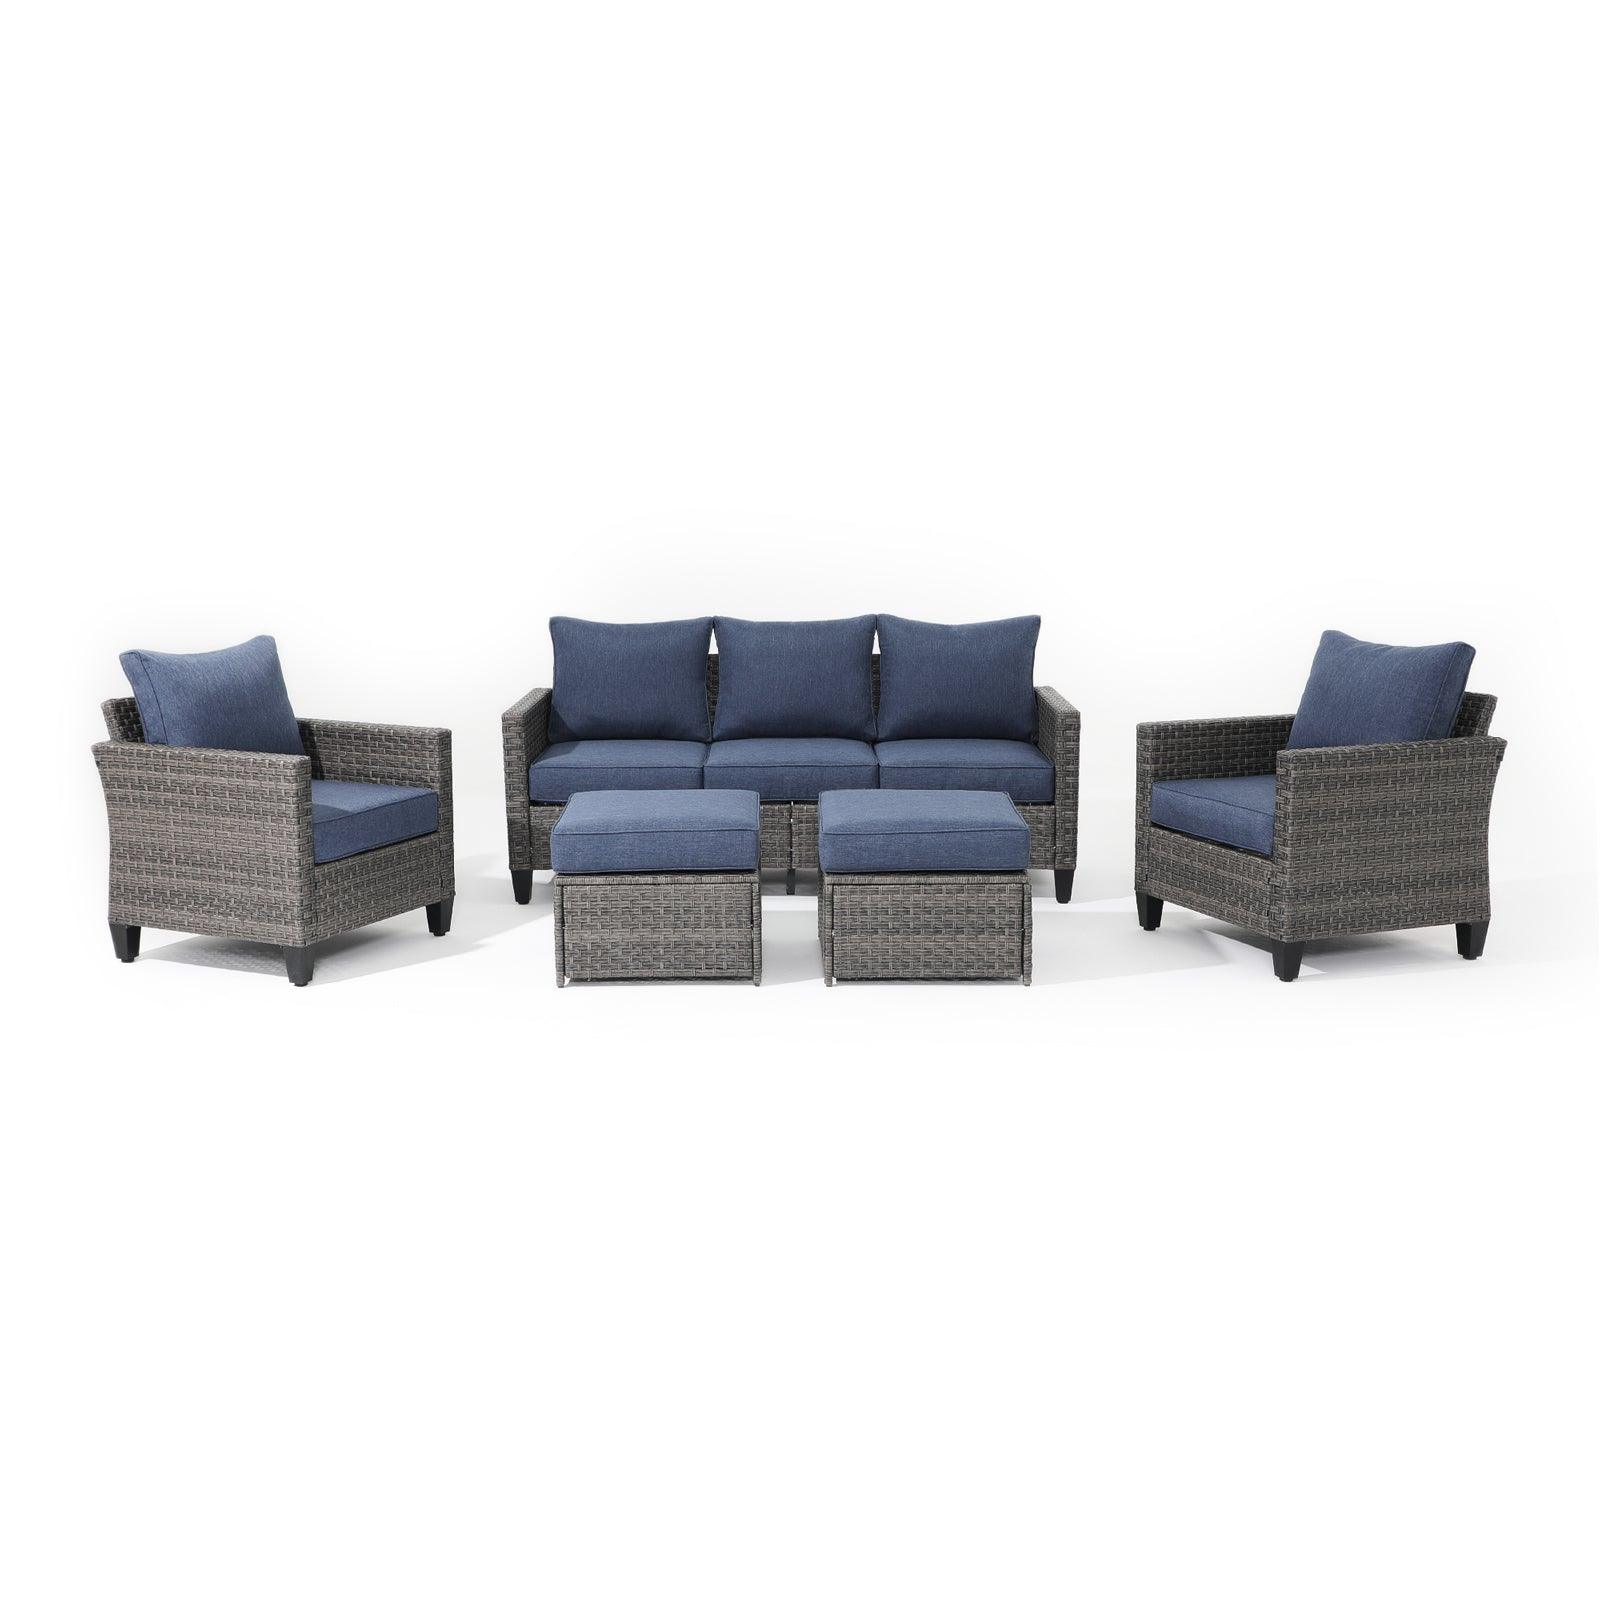 Ayia 5-Piece outdoor Sofa Set with grey Rattan design, Navy Blue cushions, a 3-seater sofa, 2 arm chairs , 2 ottomans, front view - Jardina Furniture #color_Navy blue#piece_5-pc. with ottomans